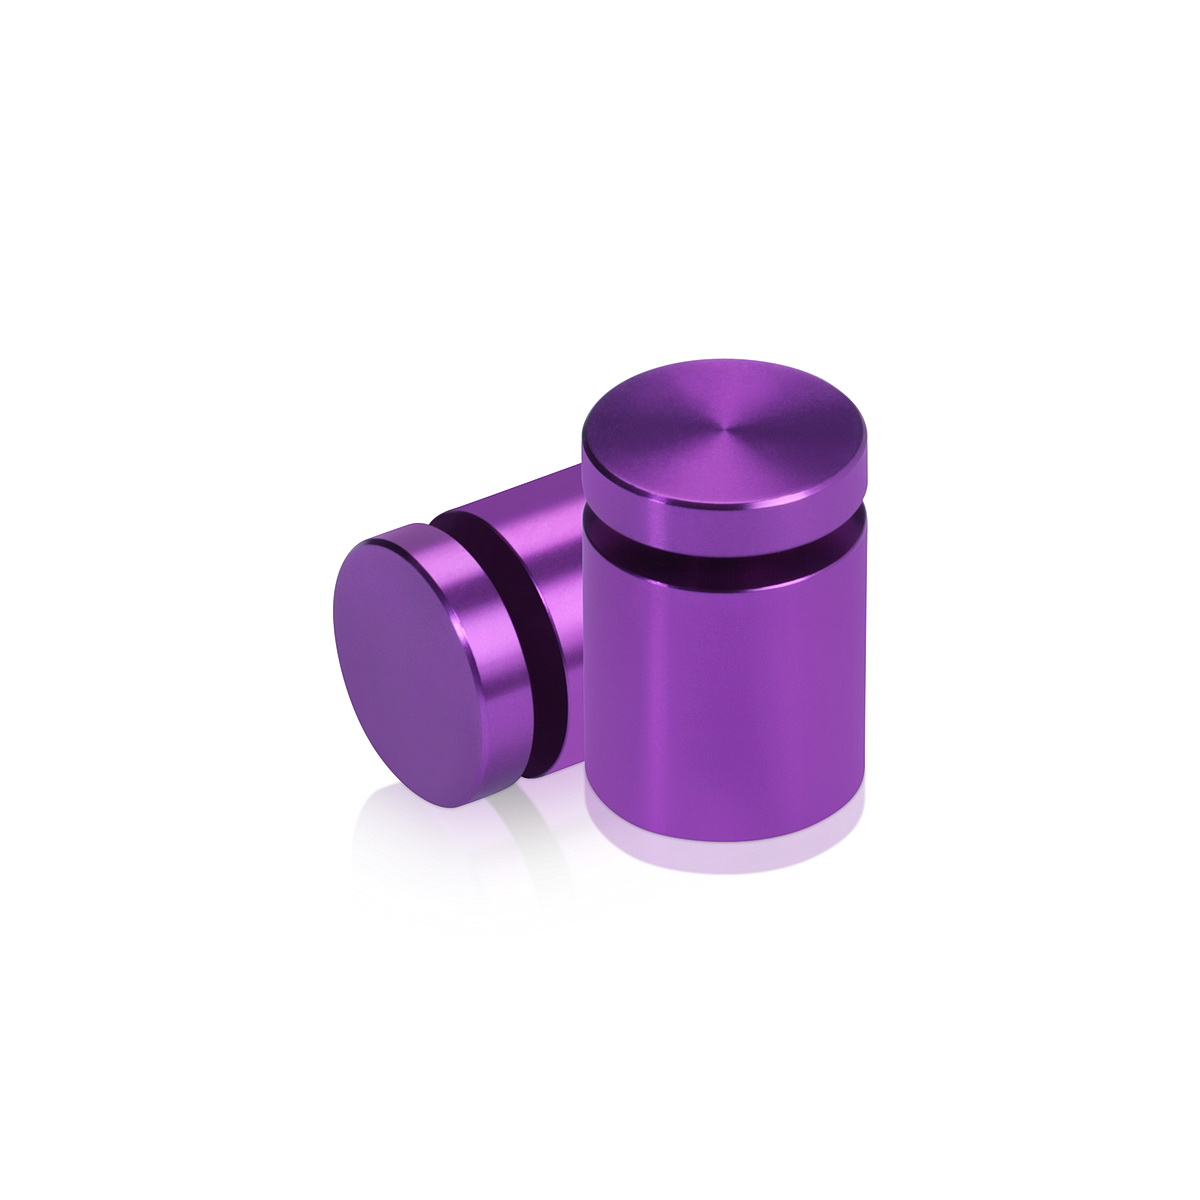 3/4'' Diameter X 3/4'' Barrel Length, Affordable Aluminum Standoffs, Purple Anodized Finish Easy Fasten Standoff (For Inside / Outside use) [Required Material Hole Size: 7/16'']